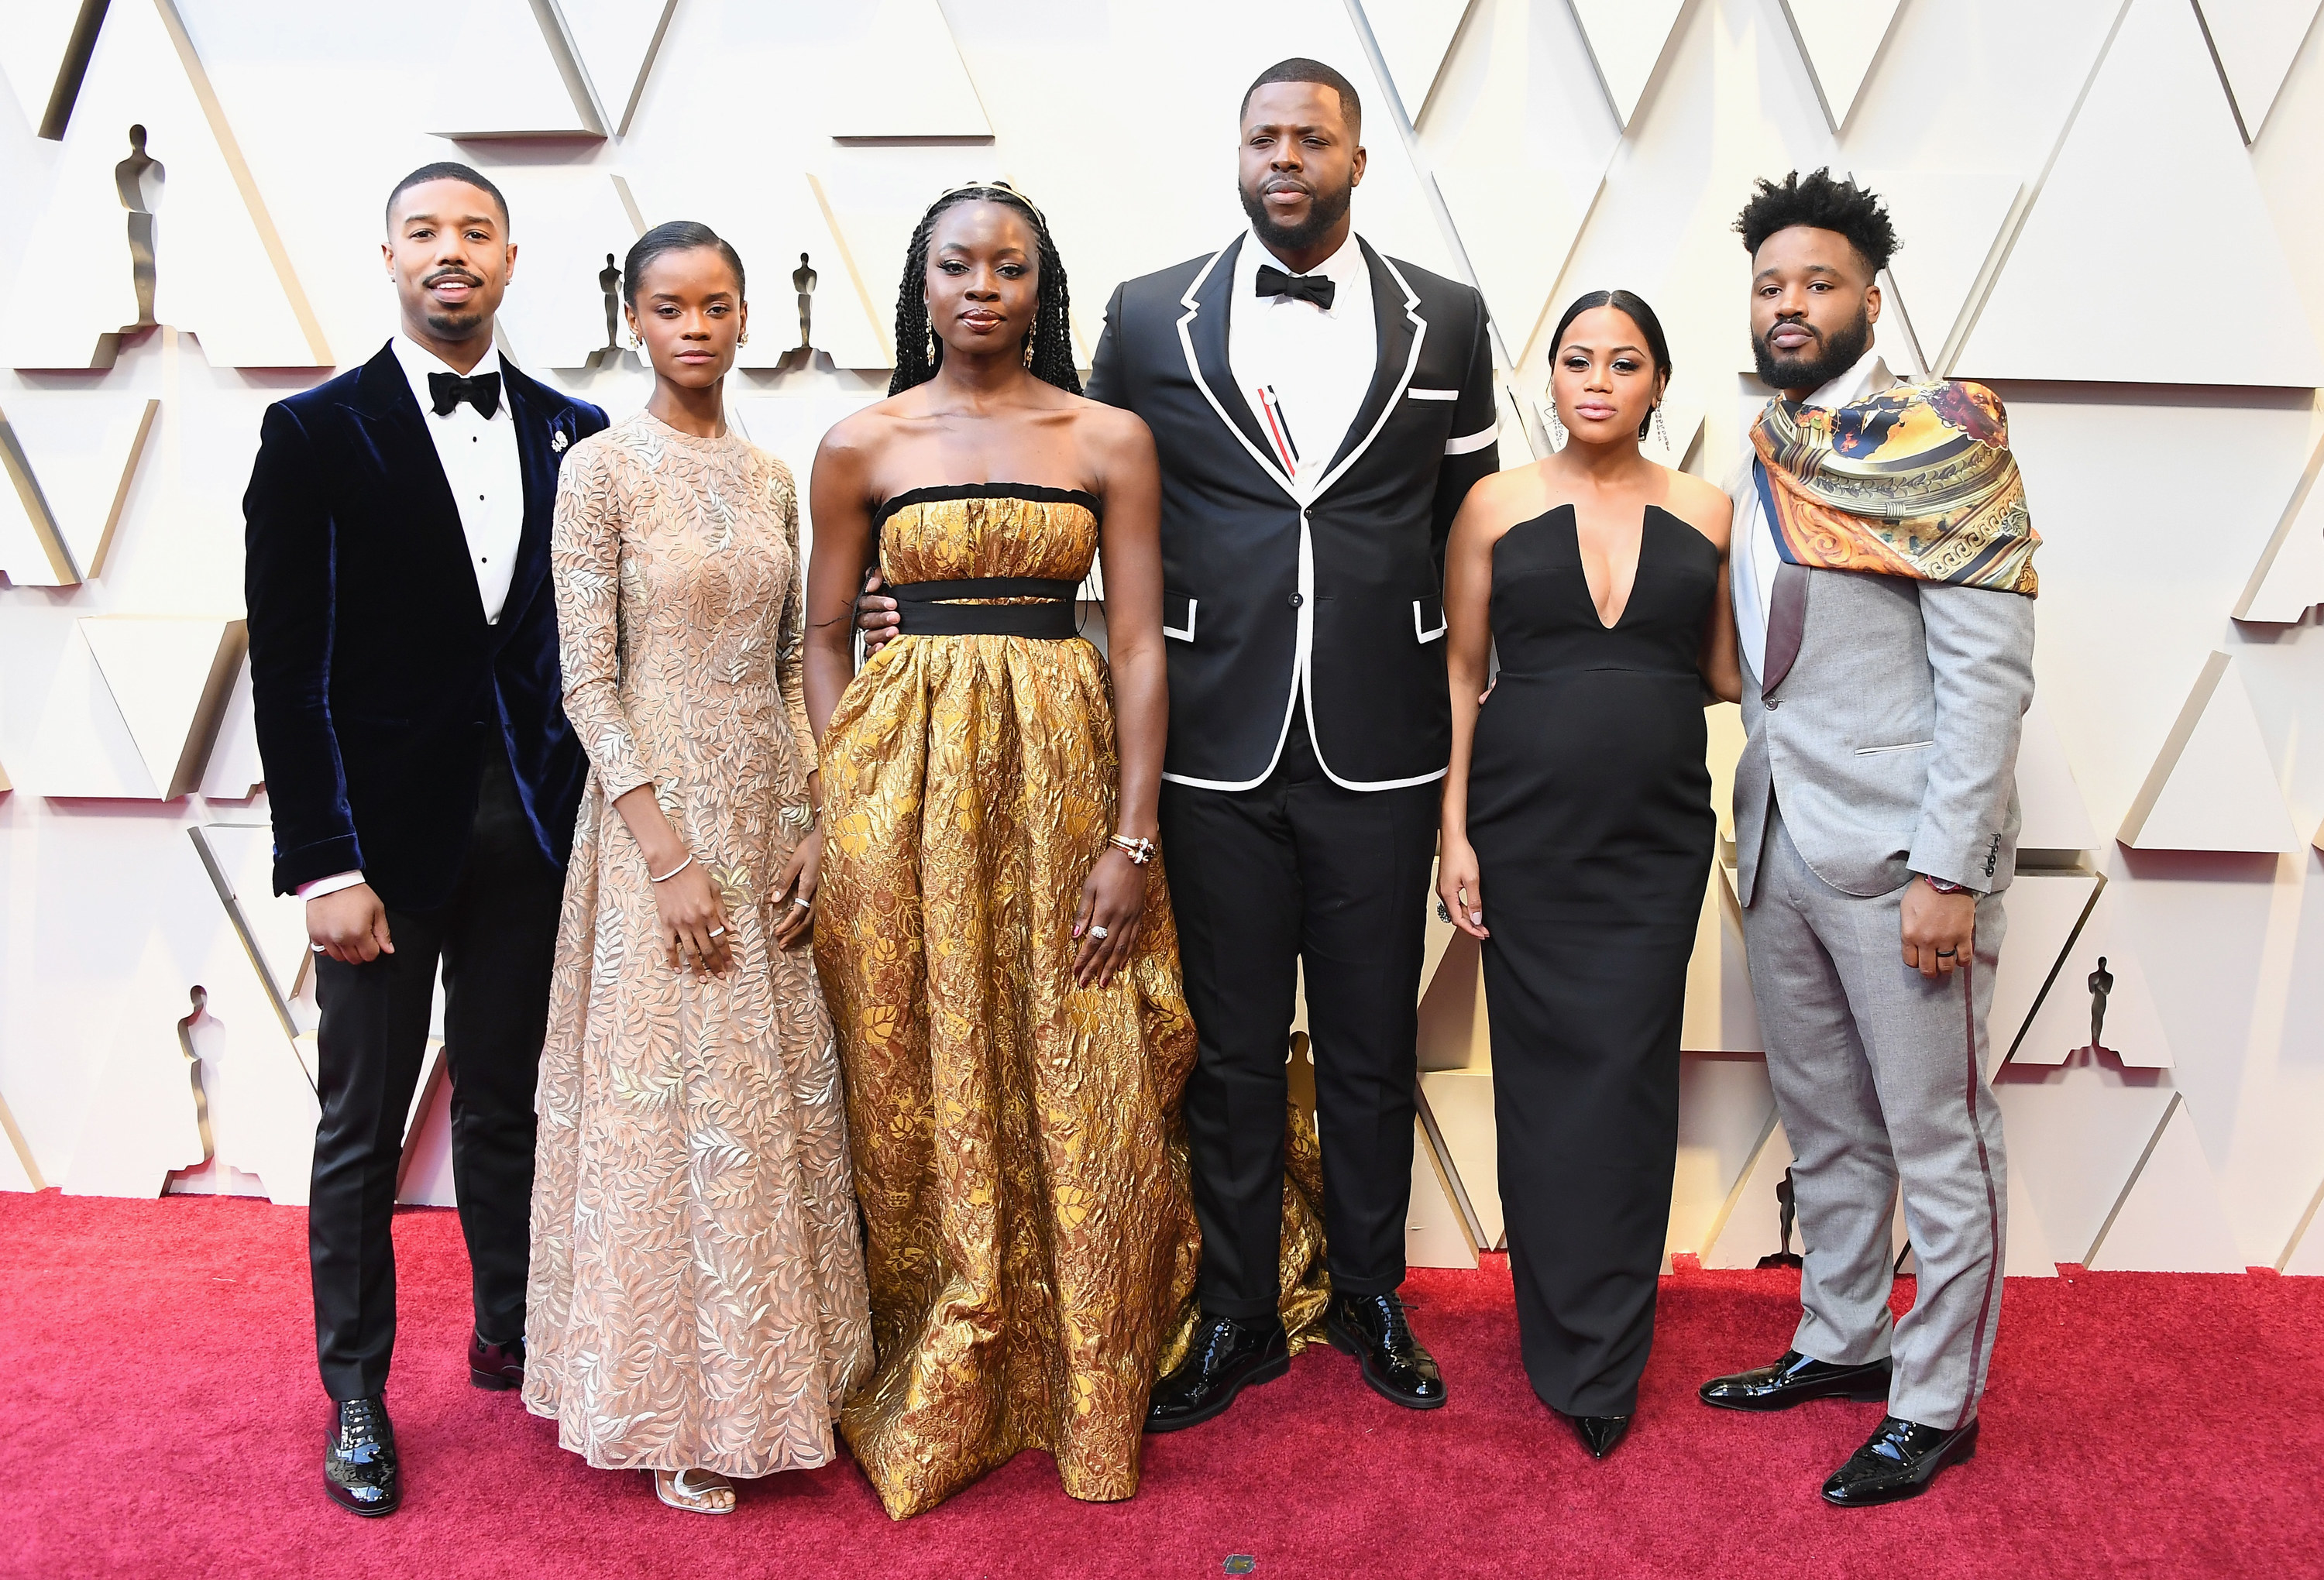 The cast of Black Panther at the Oscars